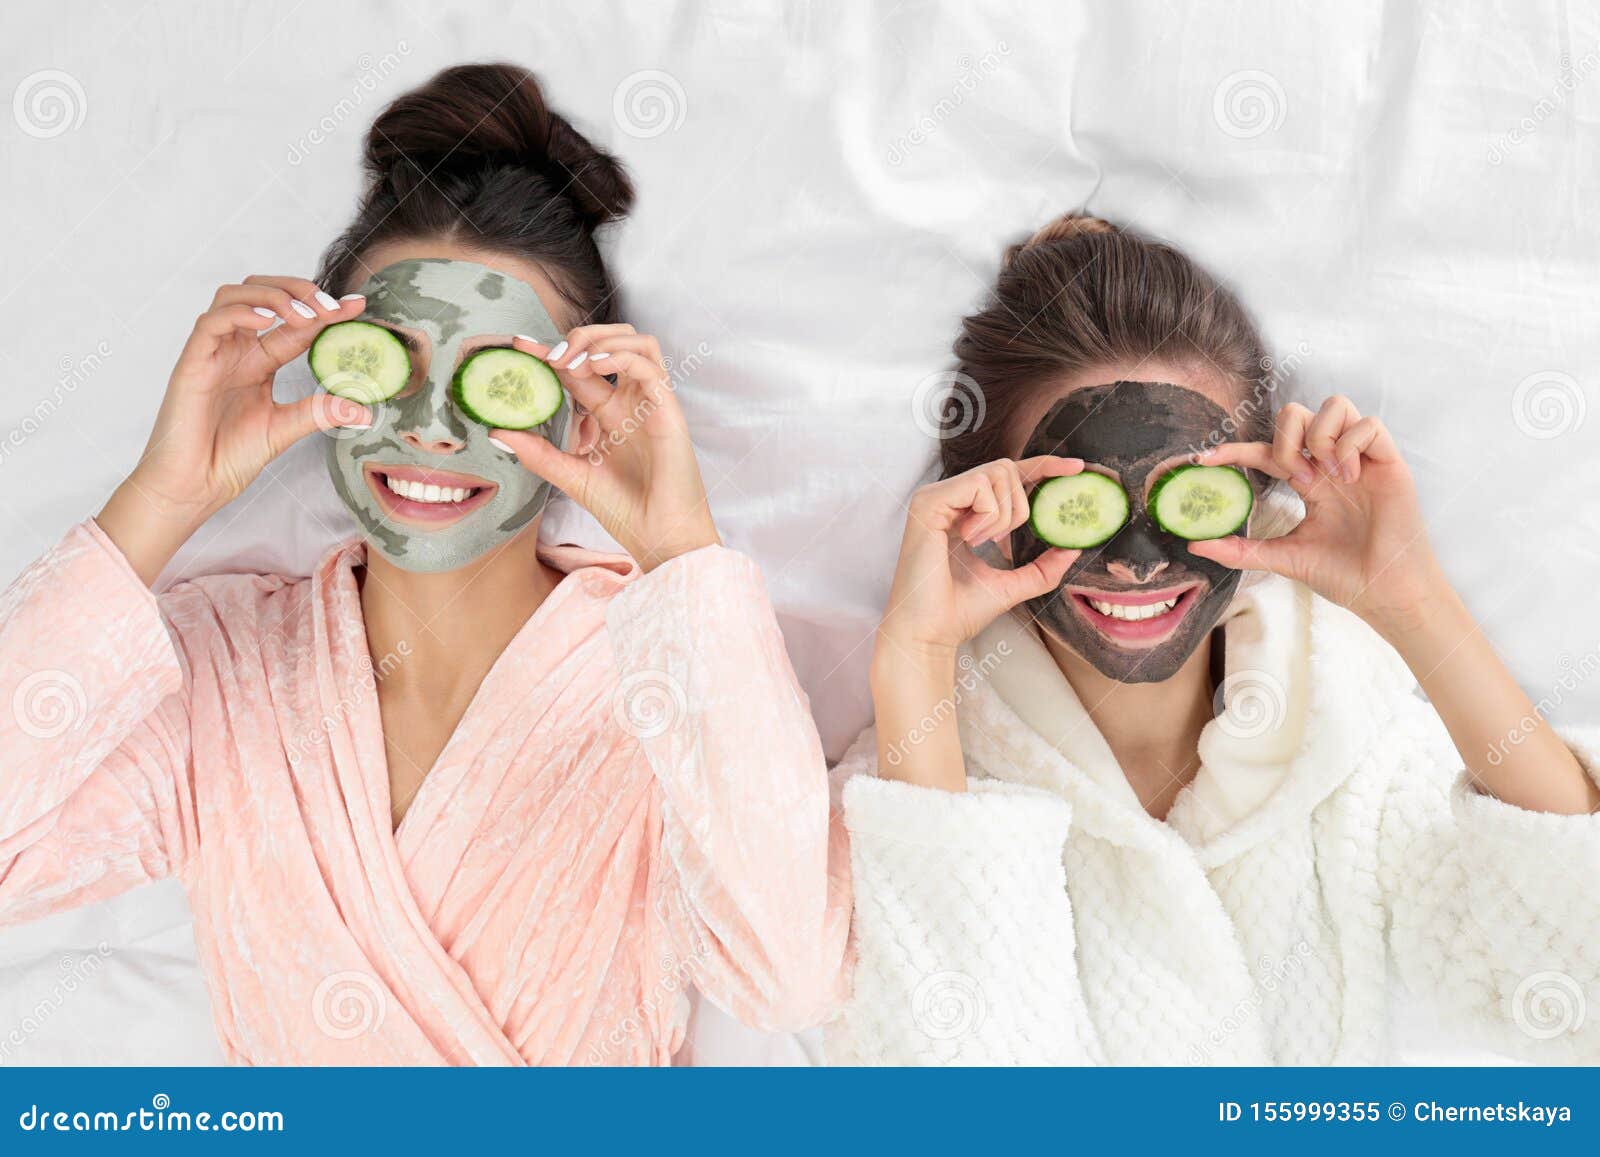 young friends with facial masks having funon bed at pamper party, top view